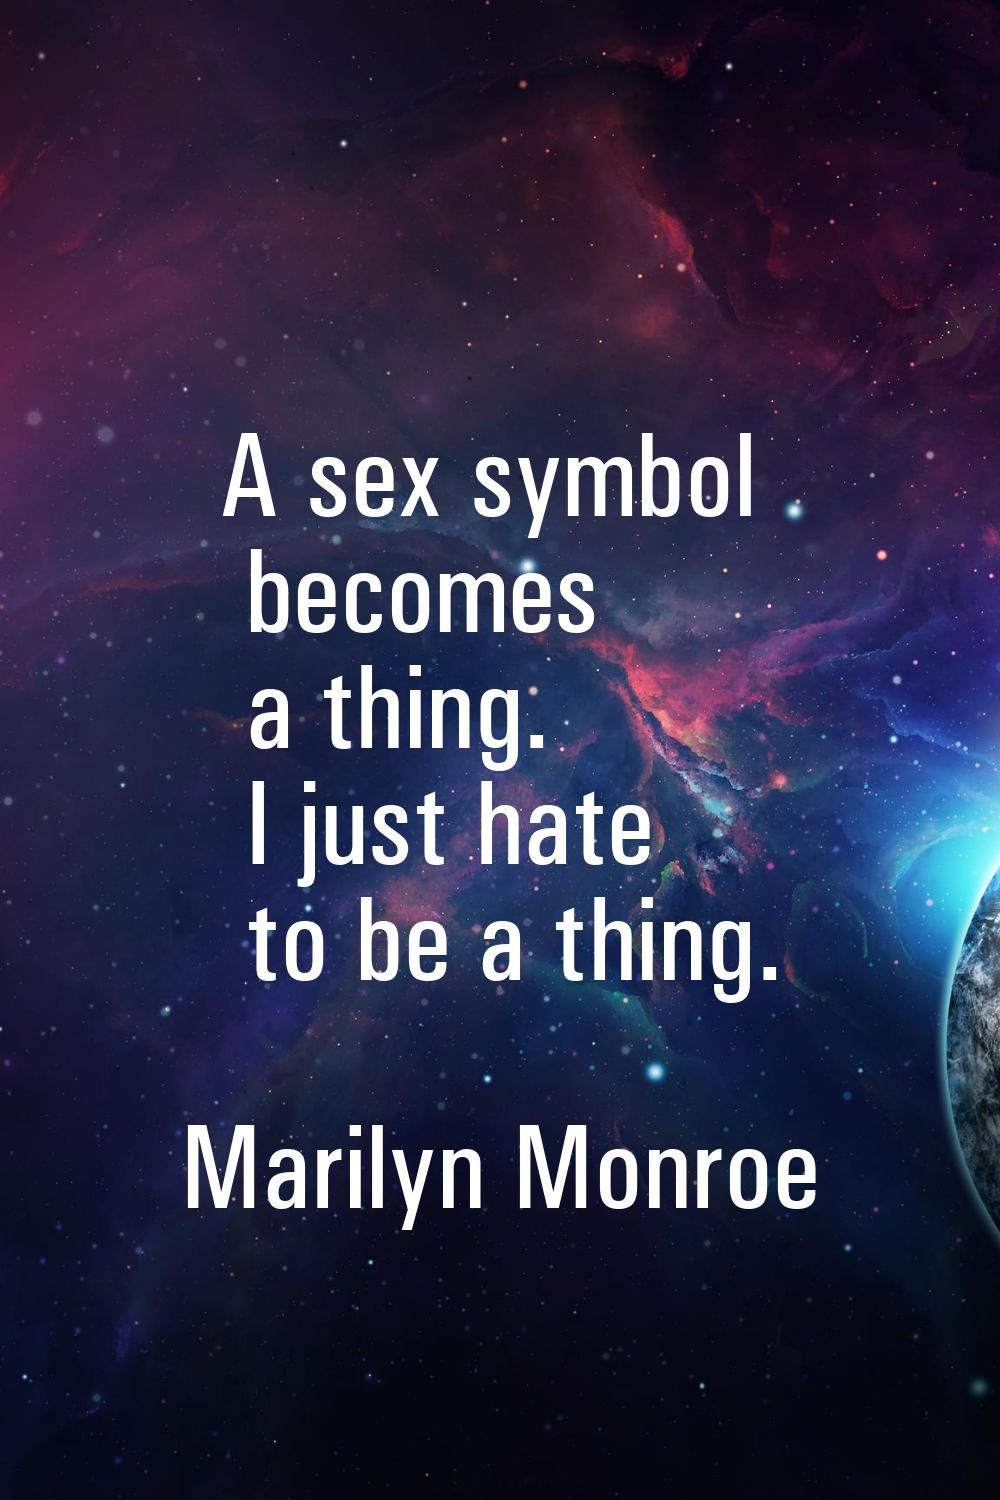 A sex symbol becomes a thing. I just hate to be a thing.